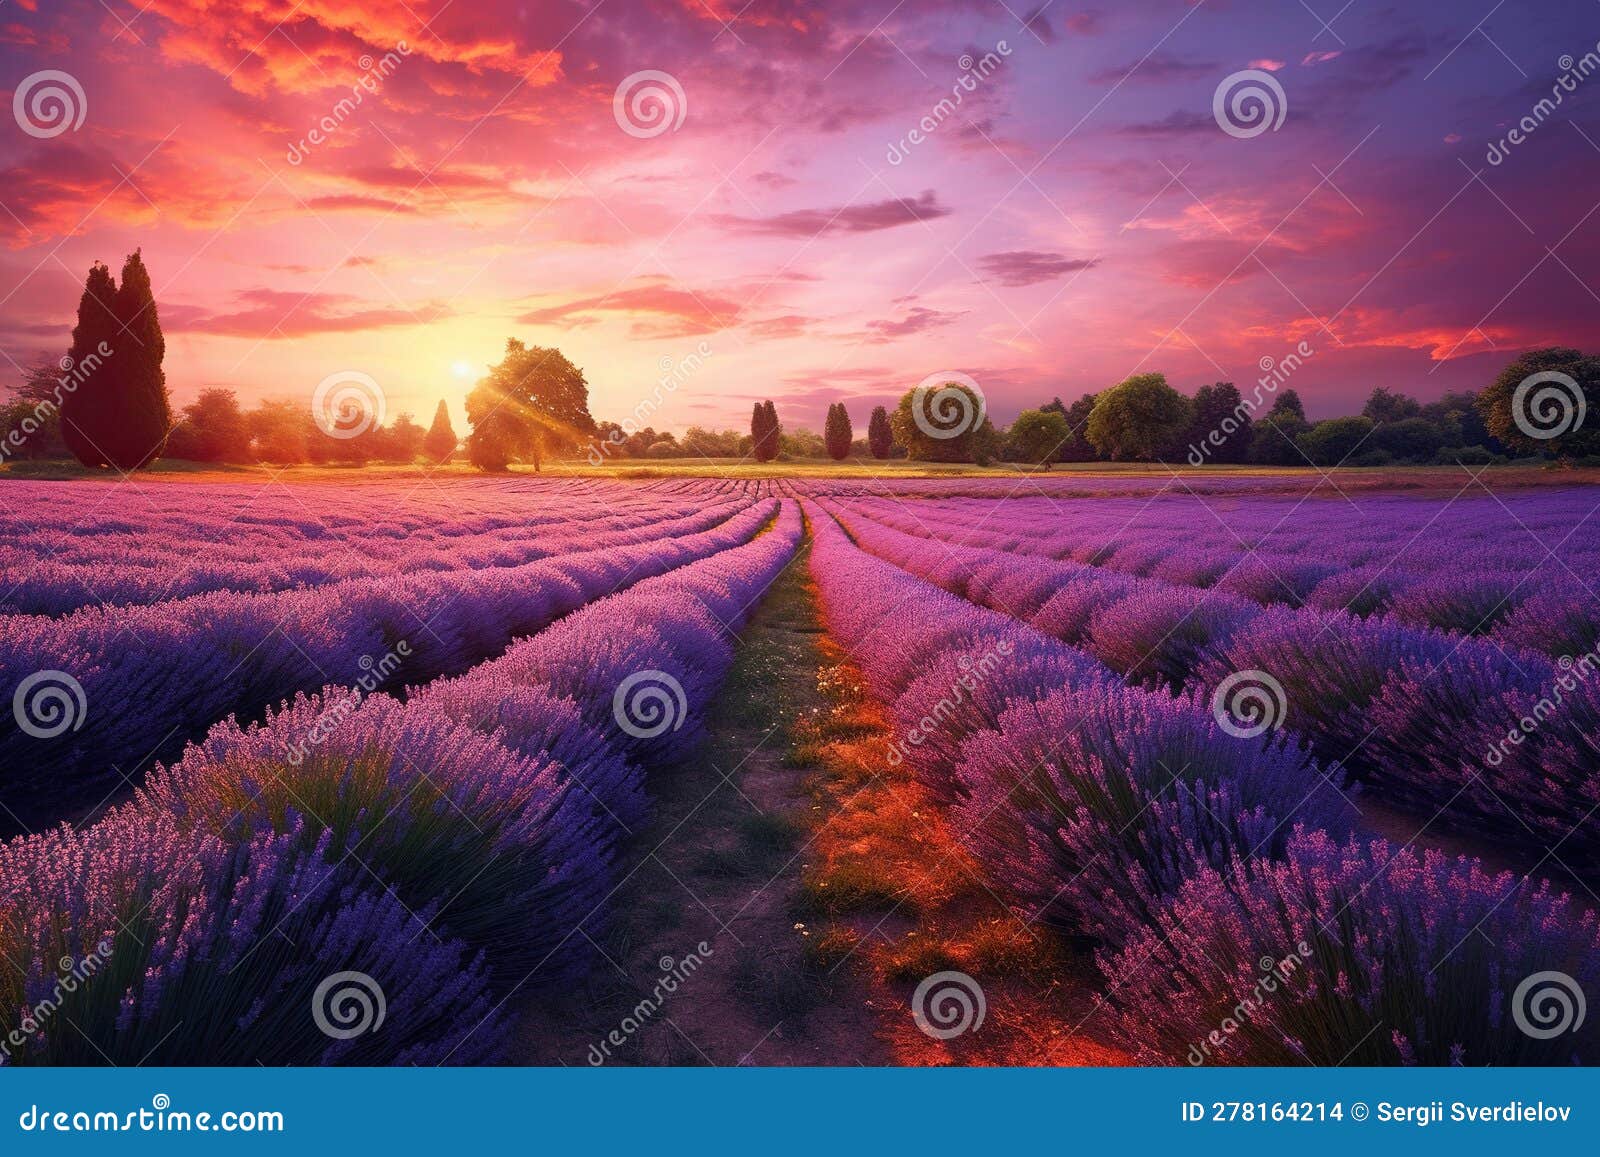 Beauty of a Magnificent Lavender Field at Sunset. Immerse Yourself in ...